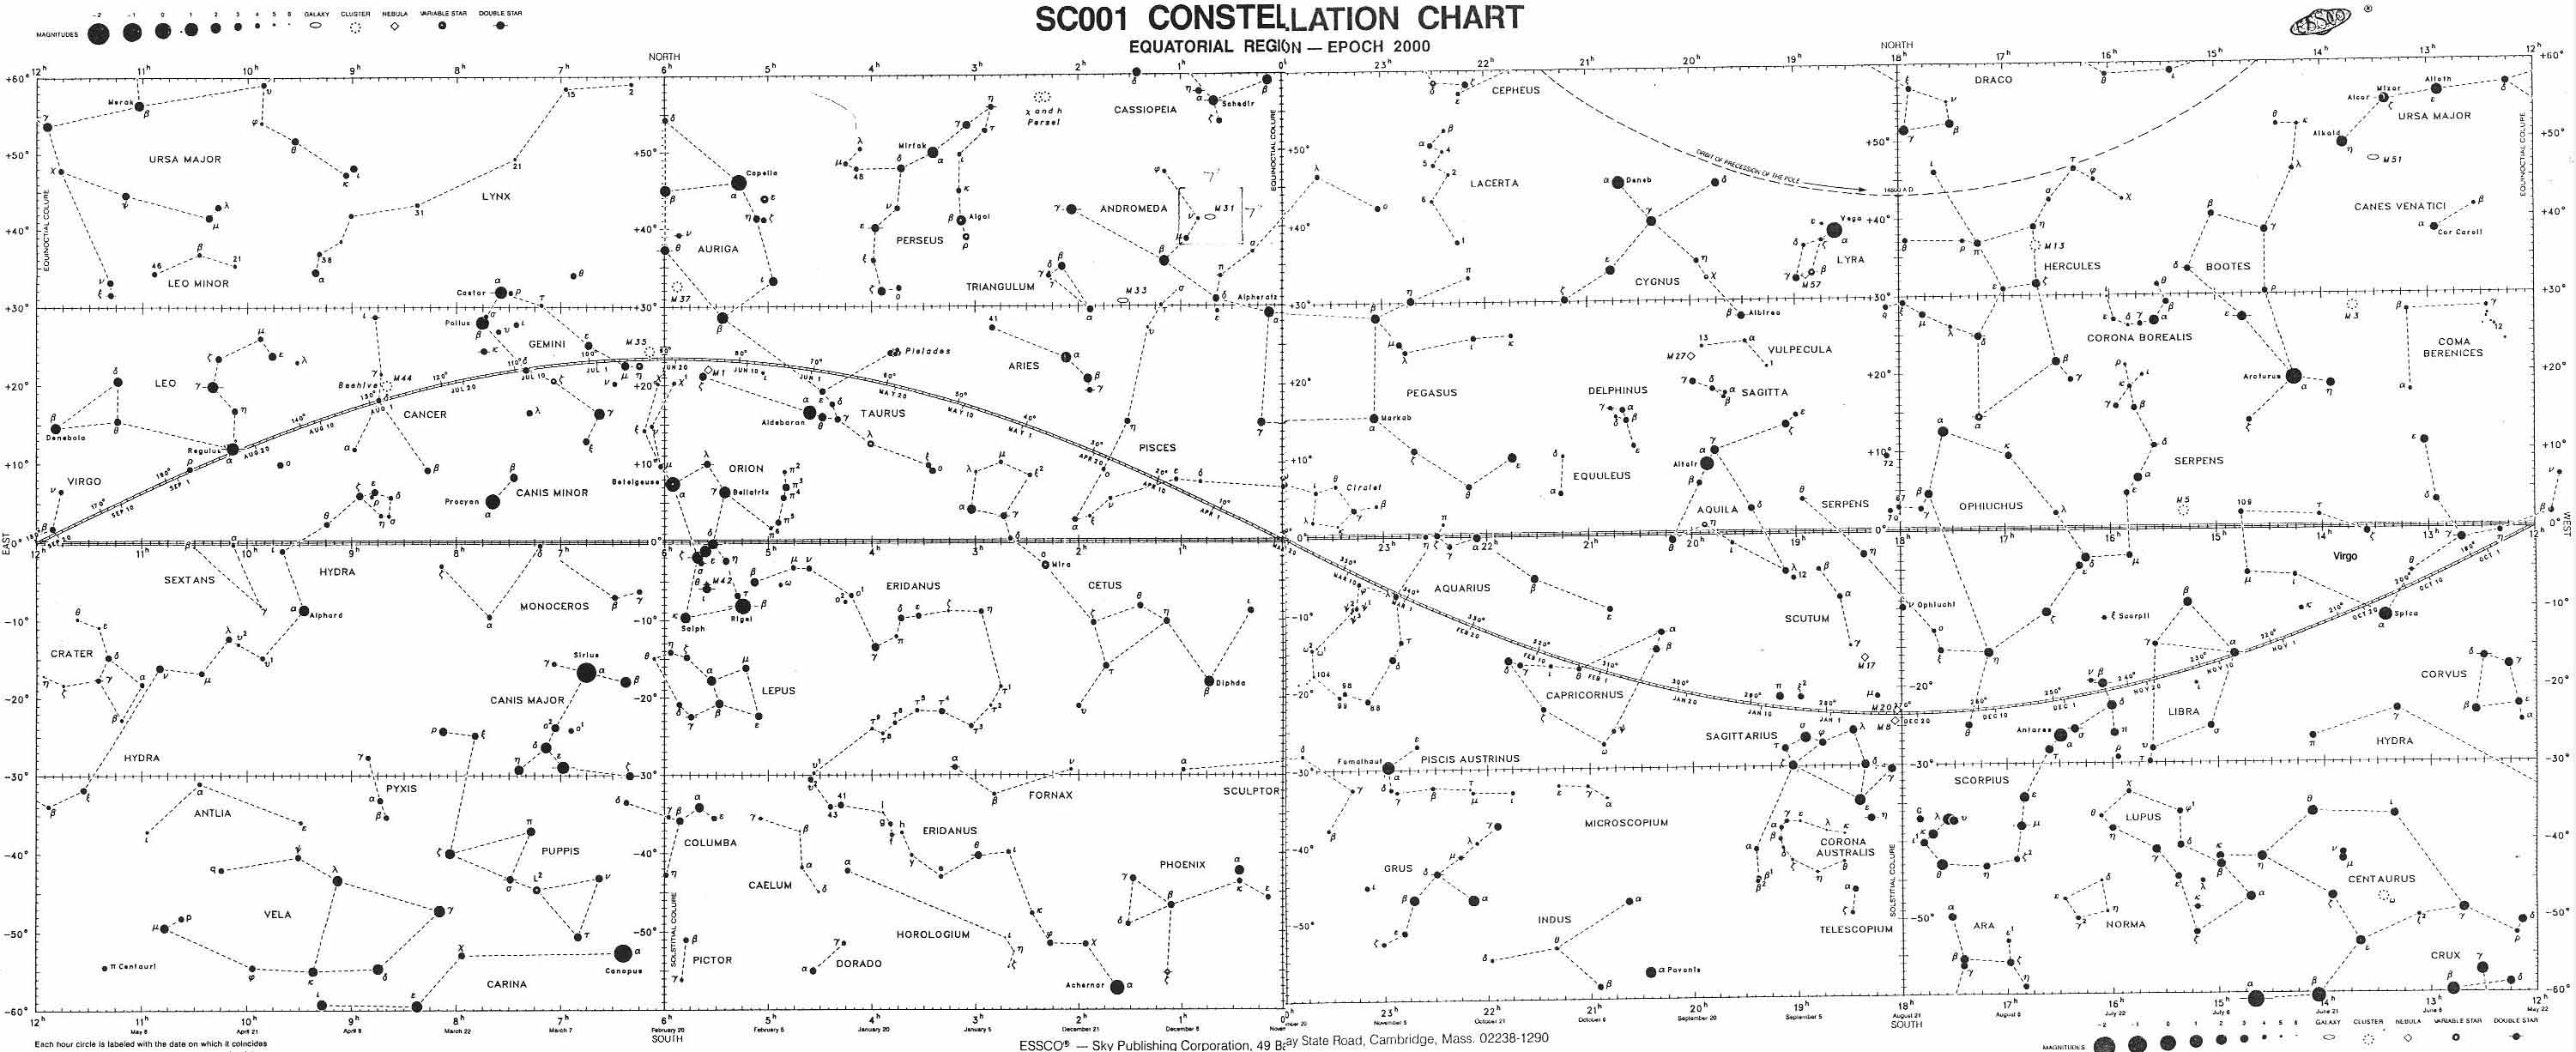 All Sky Constellation Chart with RA & DEC to set our Digital Sky Telescopes